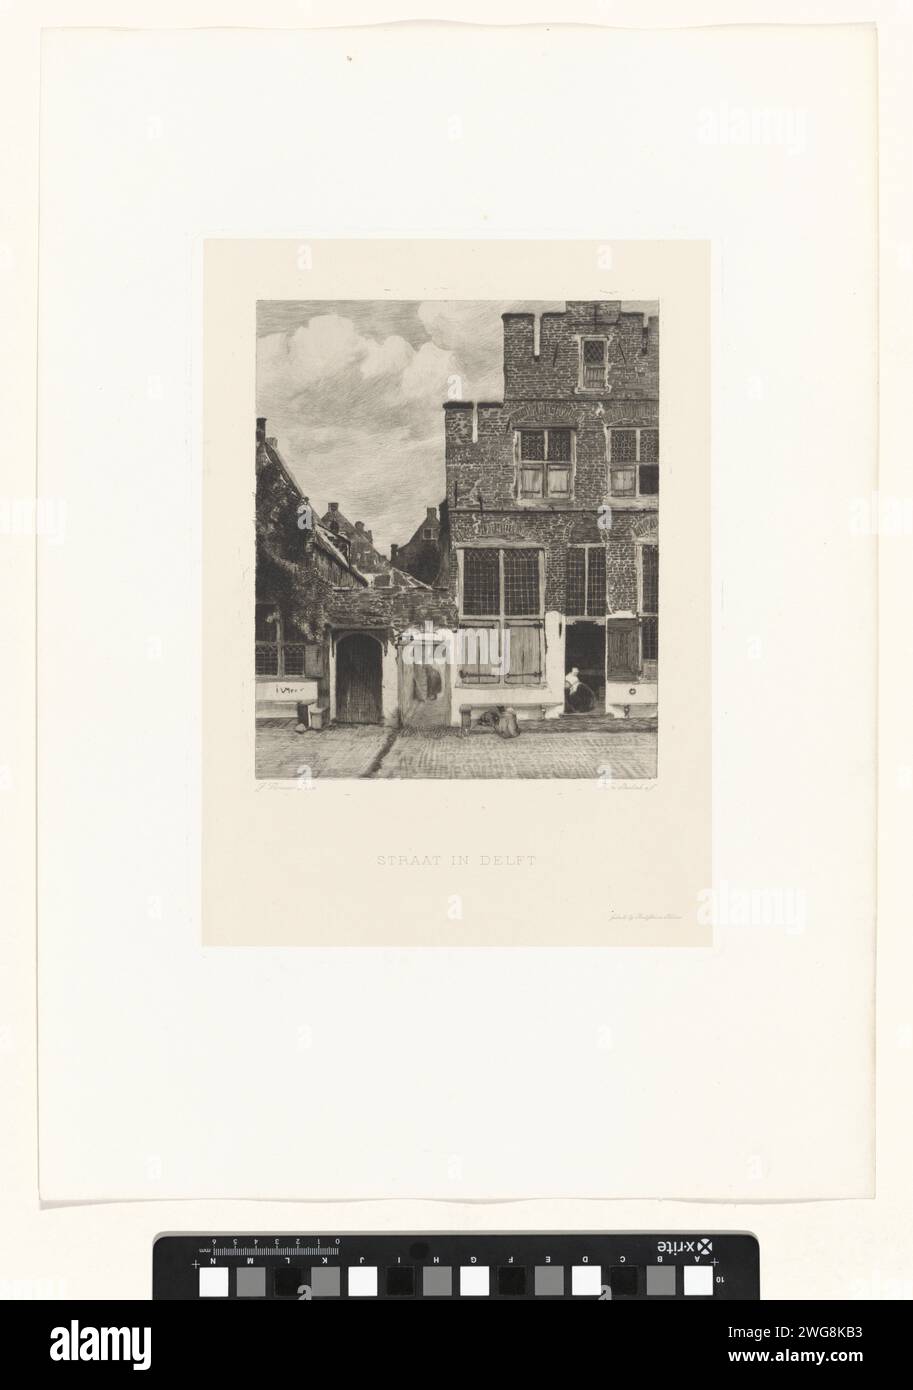 View of Huizen in Delft, known as 'Het Straatje', Willem Steelink (II), After Johannes Vermeer, 1888 - 1891 print View of Huizen in Delft, known as 'the street'. The facades of a few houses on a street in Delft. Between the houses an alley where a woman is bent over a wash. In the open door of the house on the right, a woman is crafted, left in front of the house on the sidewalk two children playing. print maker: Netherlandspublisher: Amsterdam paper. etching / drypoint street. civic architecture; edifices; dwellings. children's games and plays (+ out of doors (sports, games, etc.)). children' Stock Photo